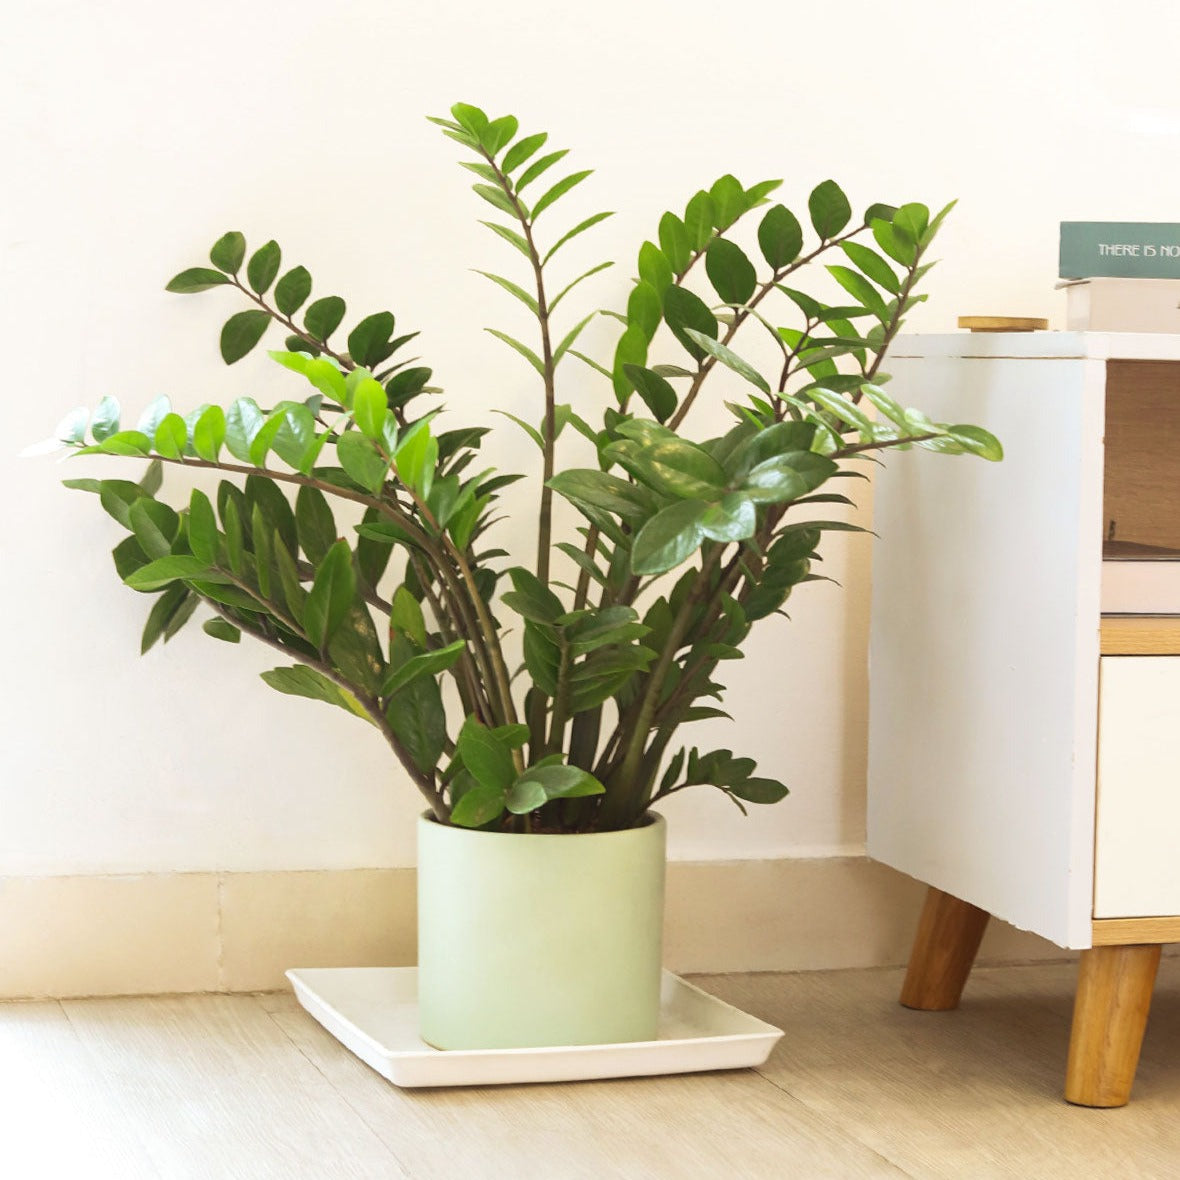 zz plant care, zamioculcas zamiifolia, houseplant for indoor air purifying, best houseplants for low light rooms